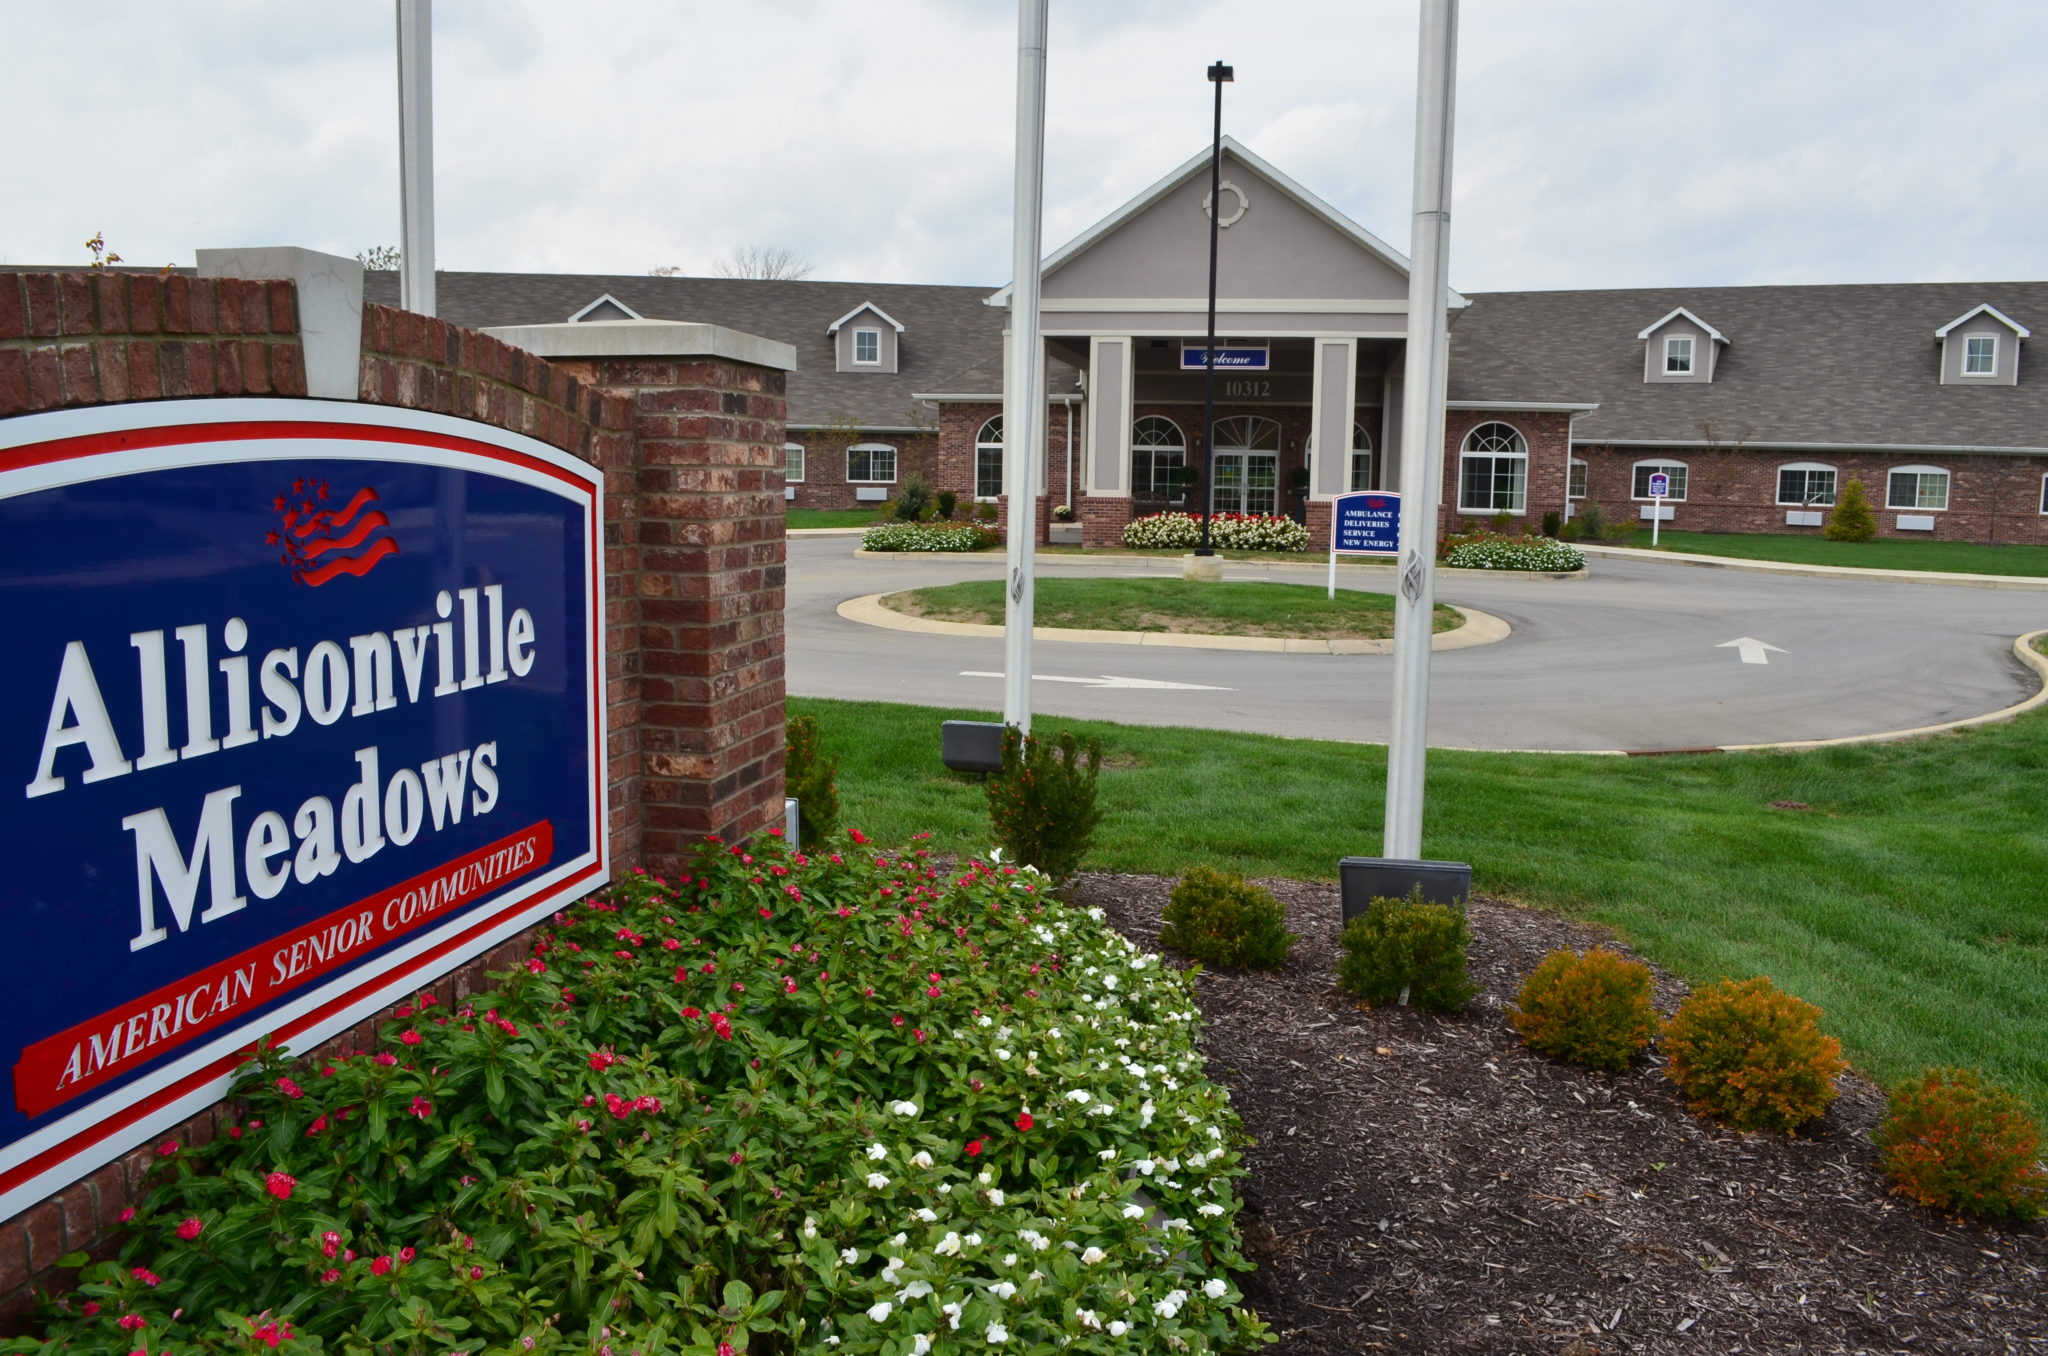 allisonville-meadows-assisted-living-image-1